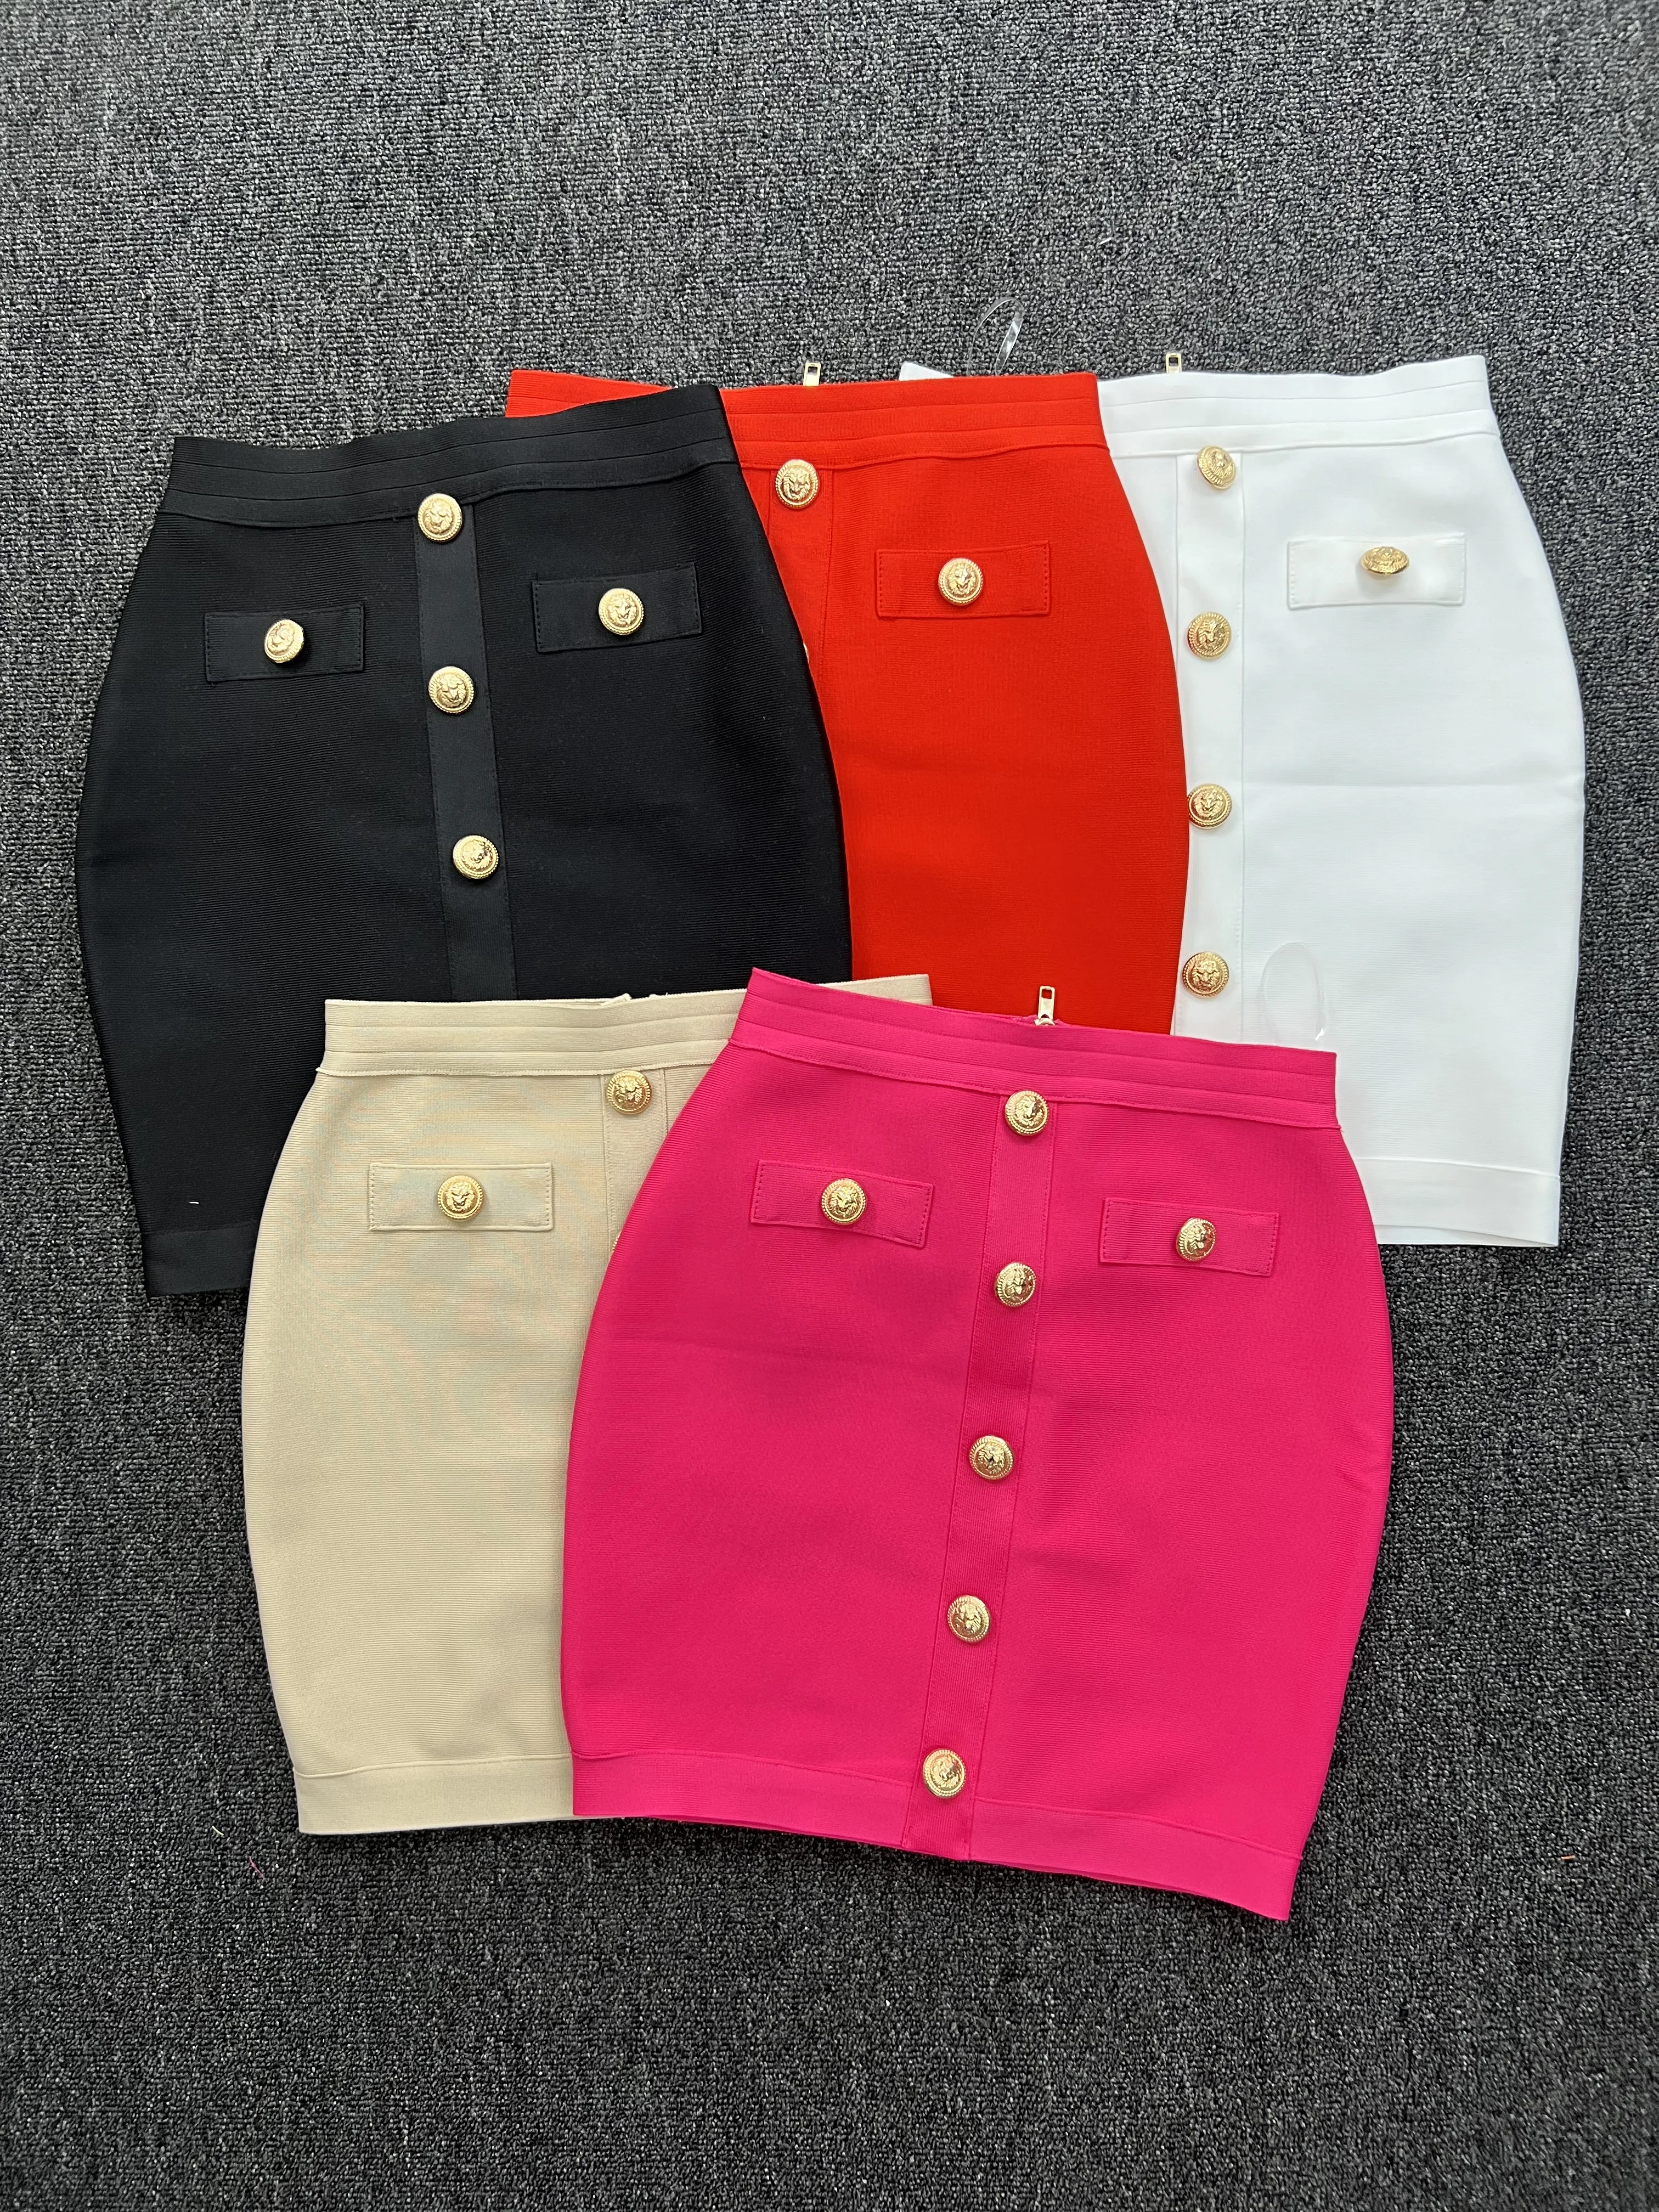 

Top Quality Elastic Bodycon Bandage Skirts For Women High Waist Gold Buttons Above Knee Pencil Skirts Ladies Office Skirt